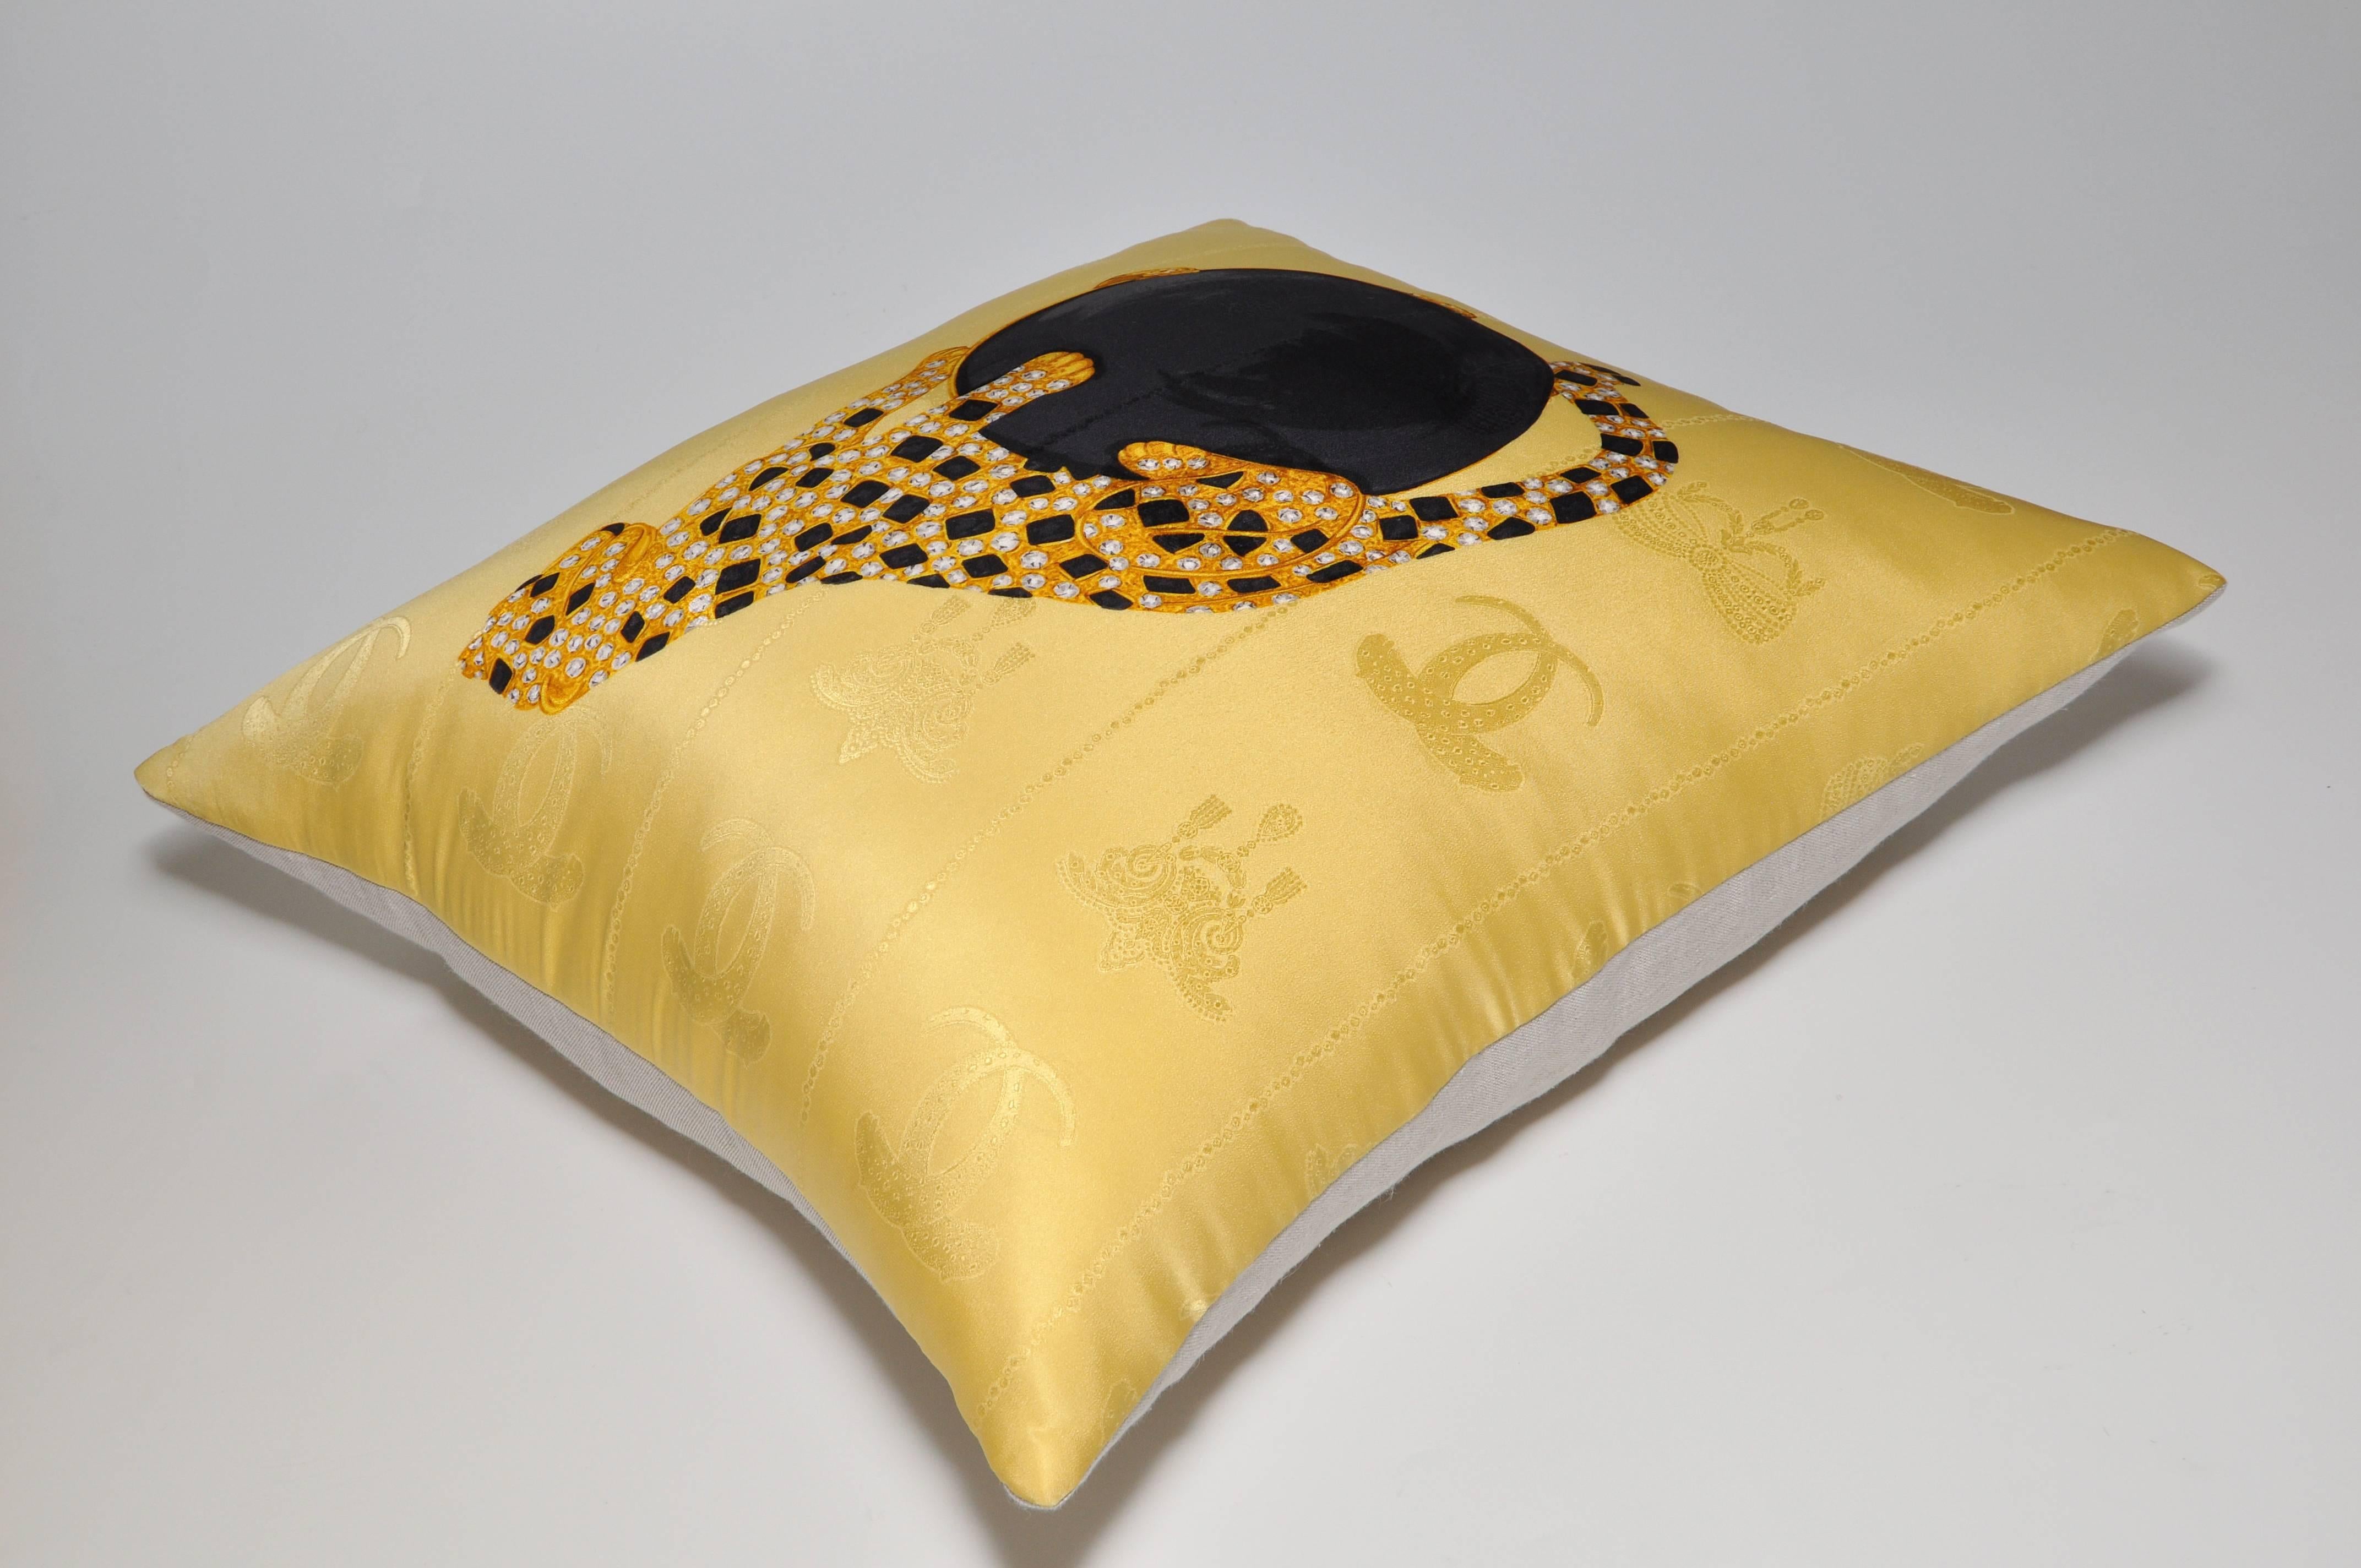 Hand-Crafted Pair of Gold Vintage Cartier Panther Jewelry Silk Scarf Cushions Pillows